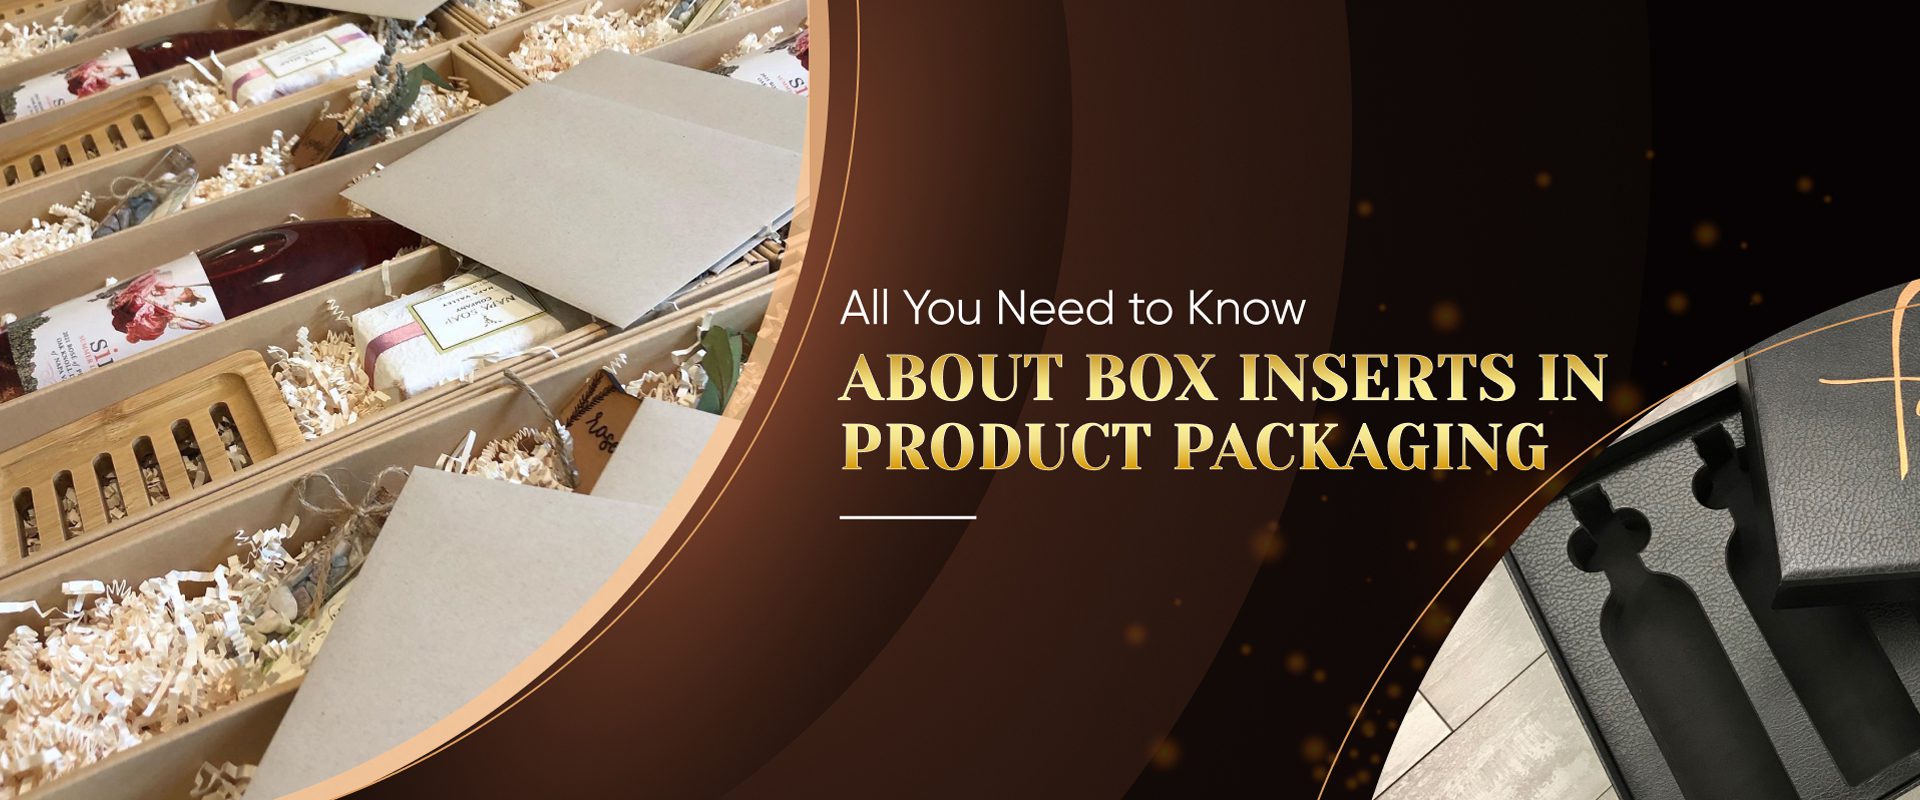 All You Need to Know About eCommerce Box Inserts in Product Packaging